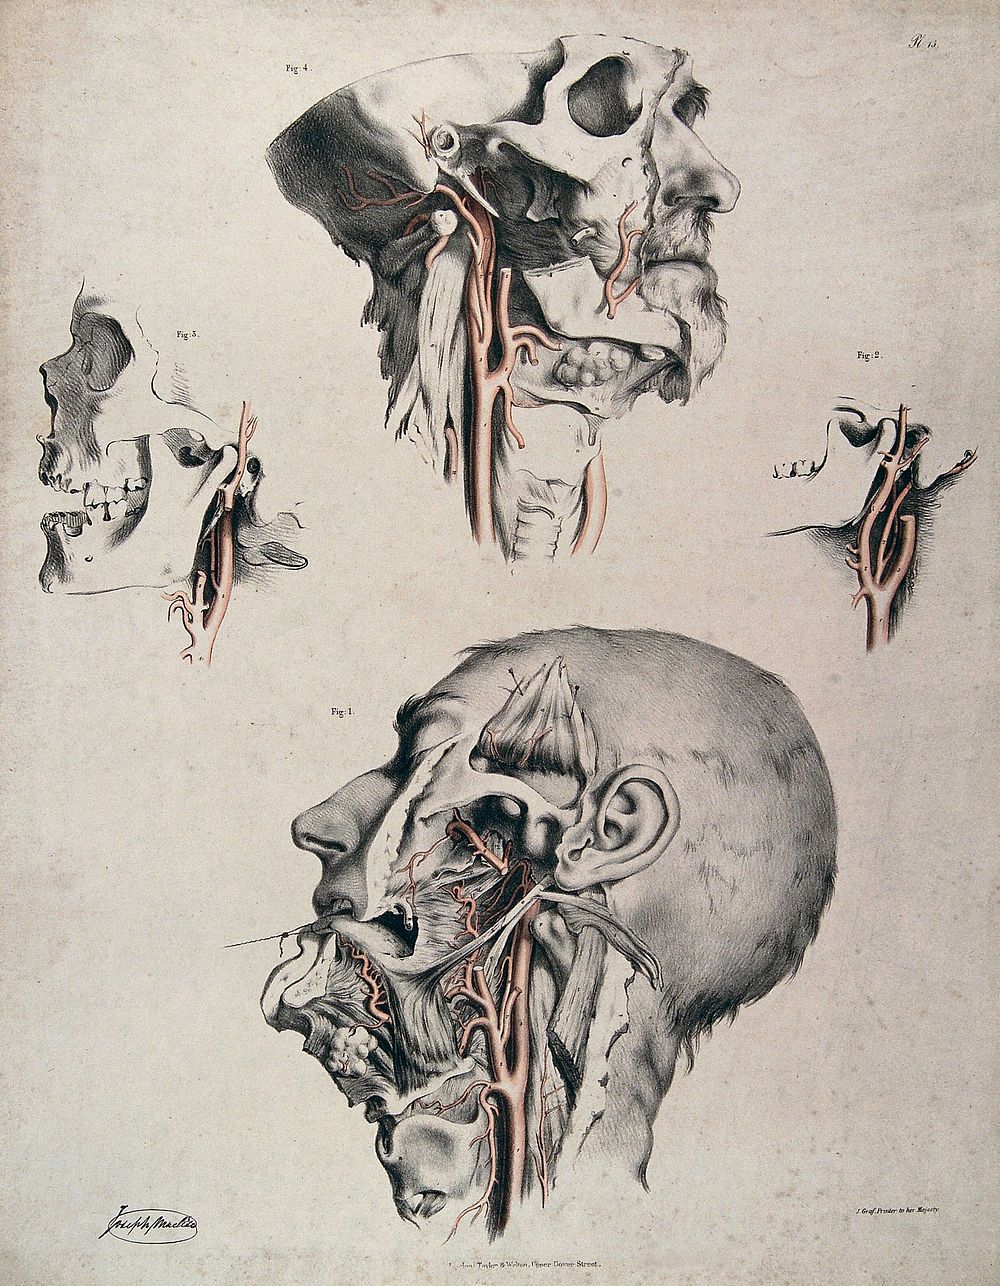 The circulatory system: four dissections of the male face, neck and skull, with arteries and blood vessels in red. Coloured…